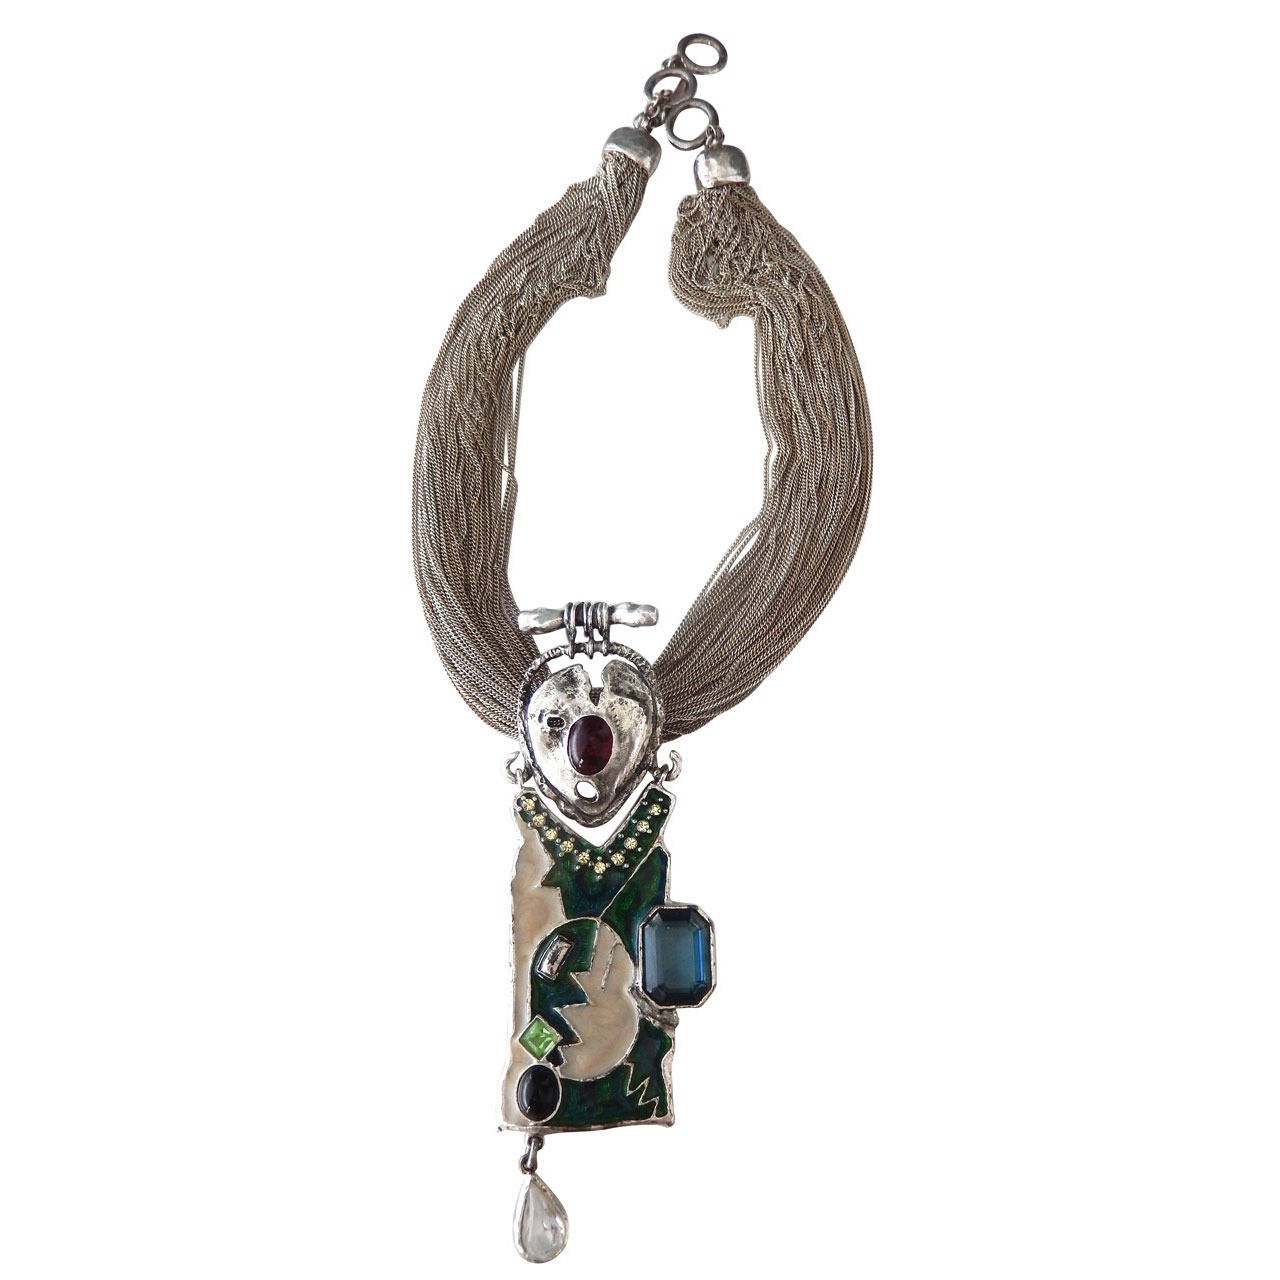 A rare multi-strand necklace by Christian Lacroix that combines tribal and abstract imagery in an opulent design. As he did in his couture fashion, Lacroix was inspired by historical and multi-cultural references, mixing patterns and materials